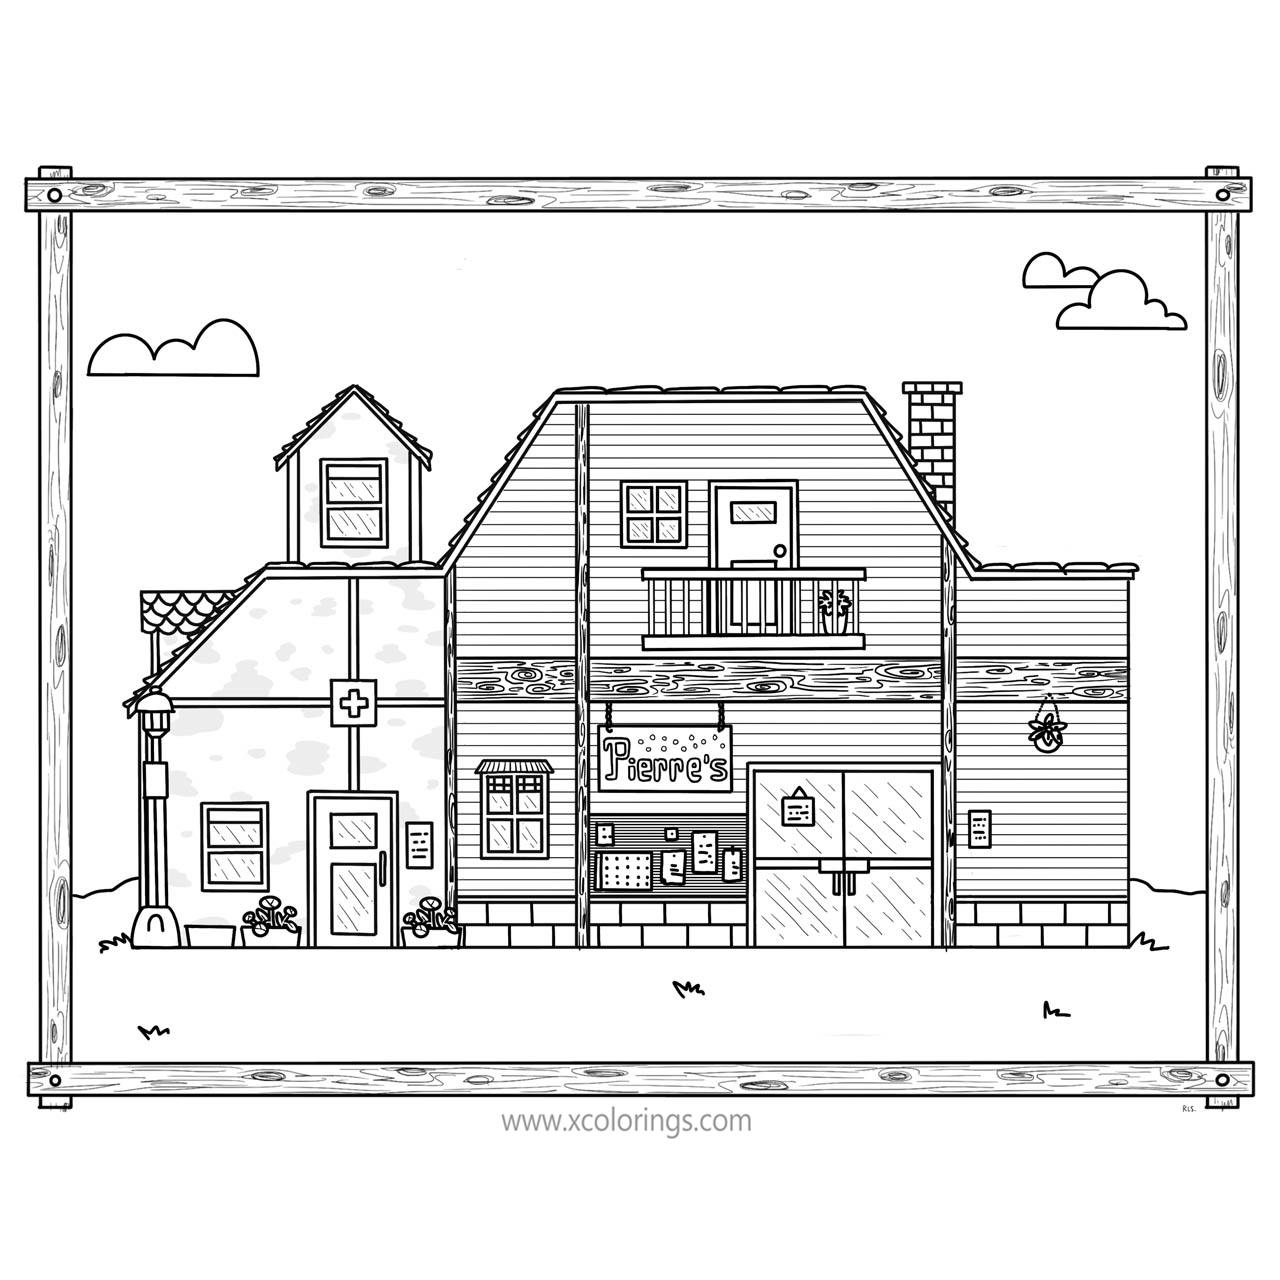 Free Stardew Valley Coloring Pages from RobynSmith printable